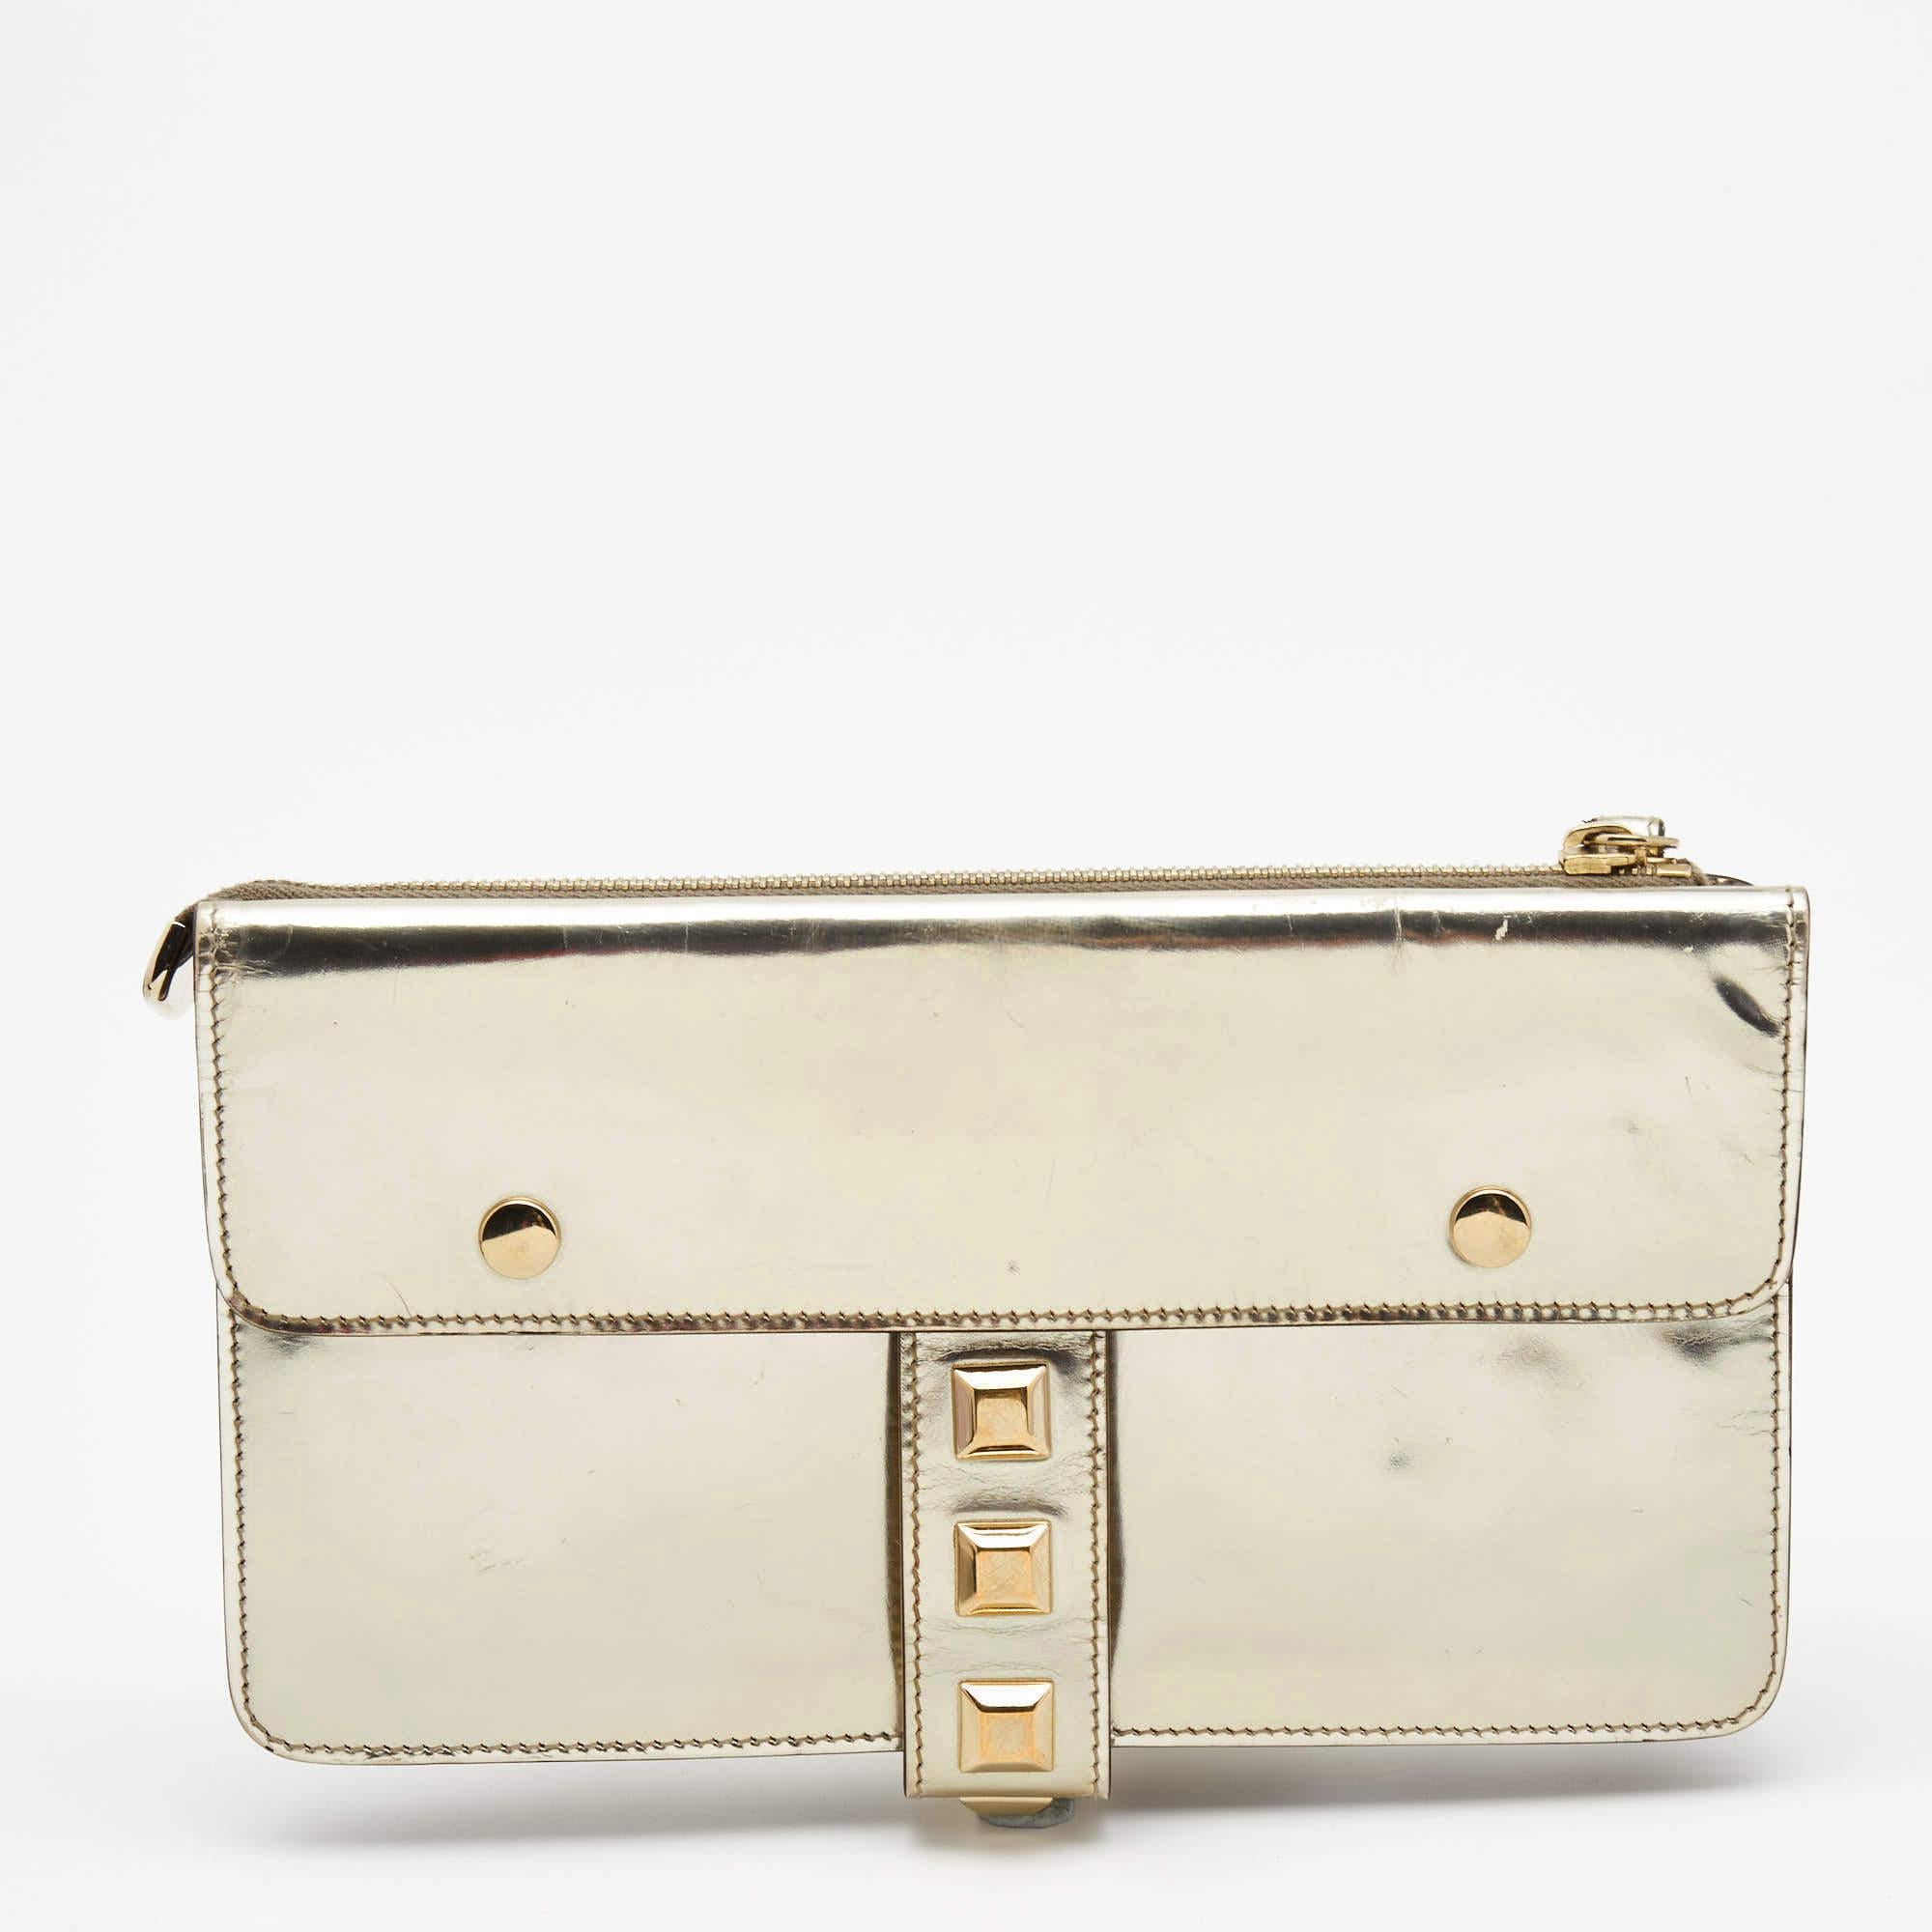 Flaunt this stunning yet practical wristlet clutch from Gucci at the next party! It has a dazzling metallic gold, laminated leather body that is highlighted with gold-tone studs. It comes with a smooth fabric interior to hold your essentials.

